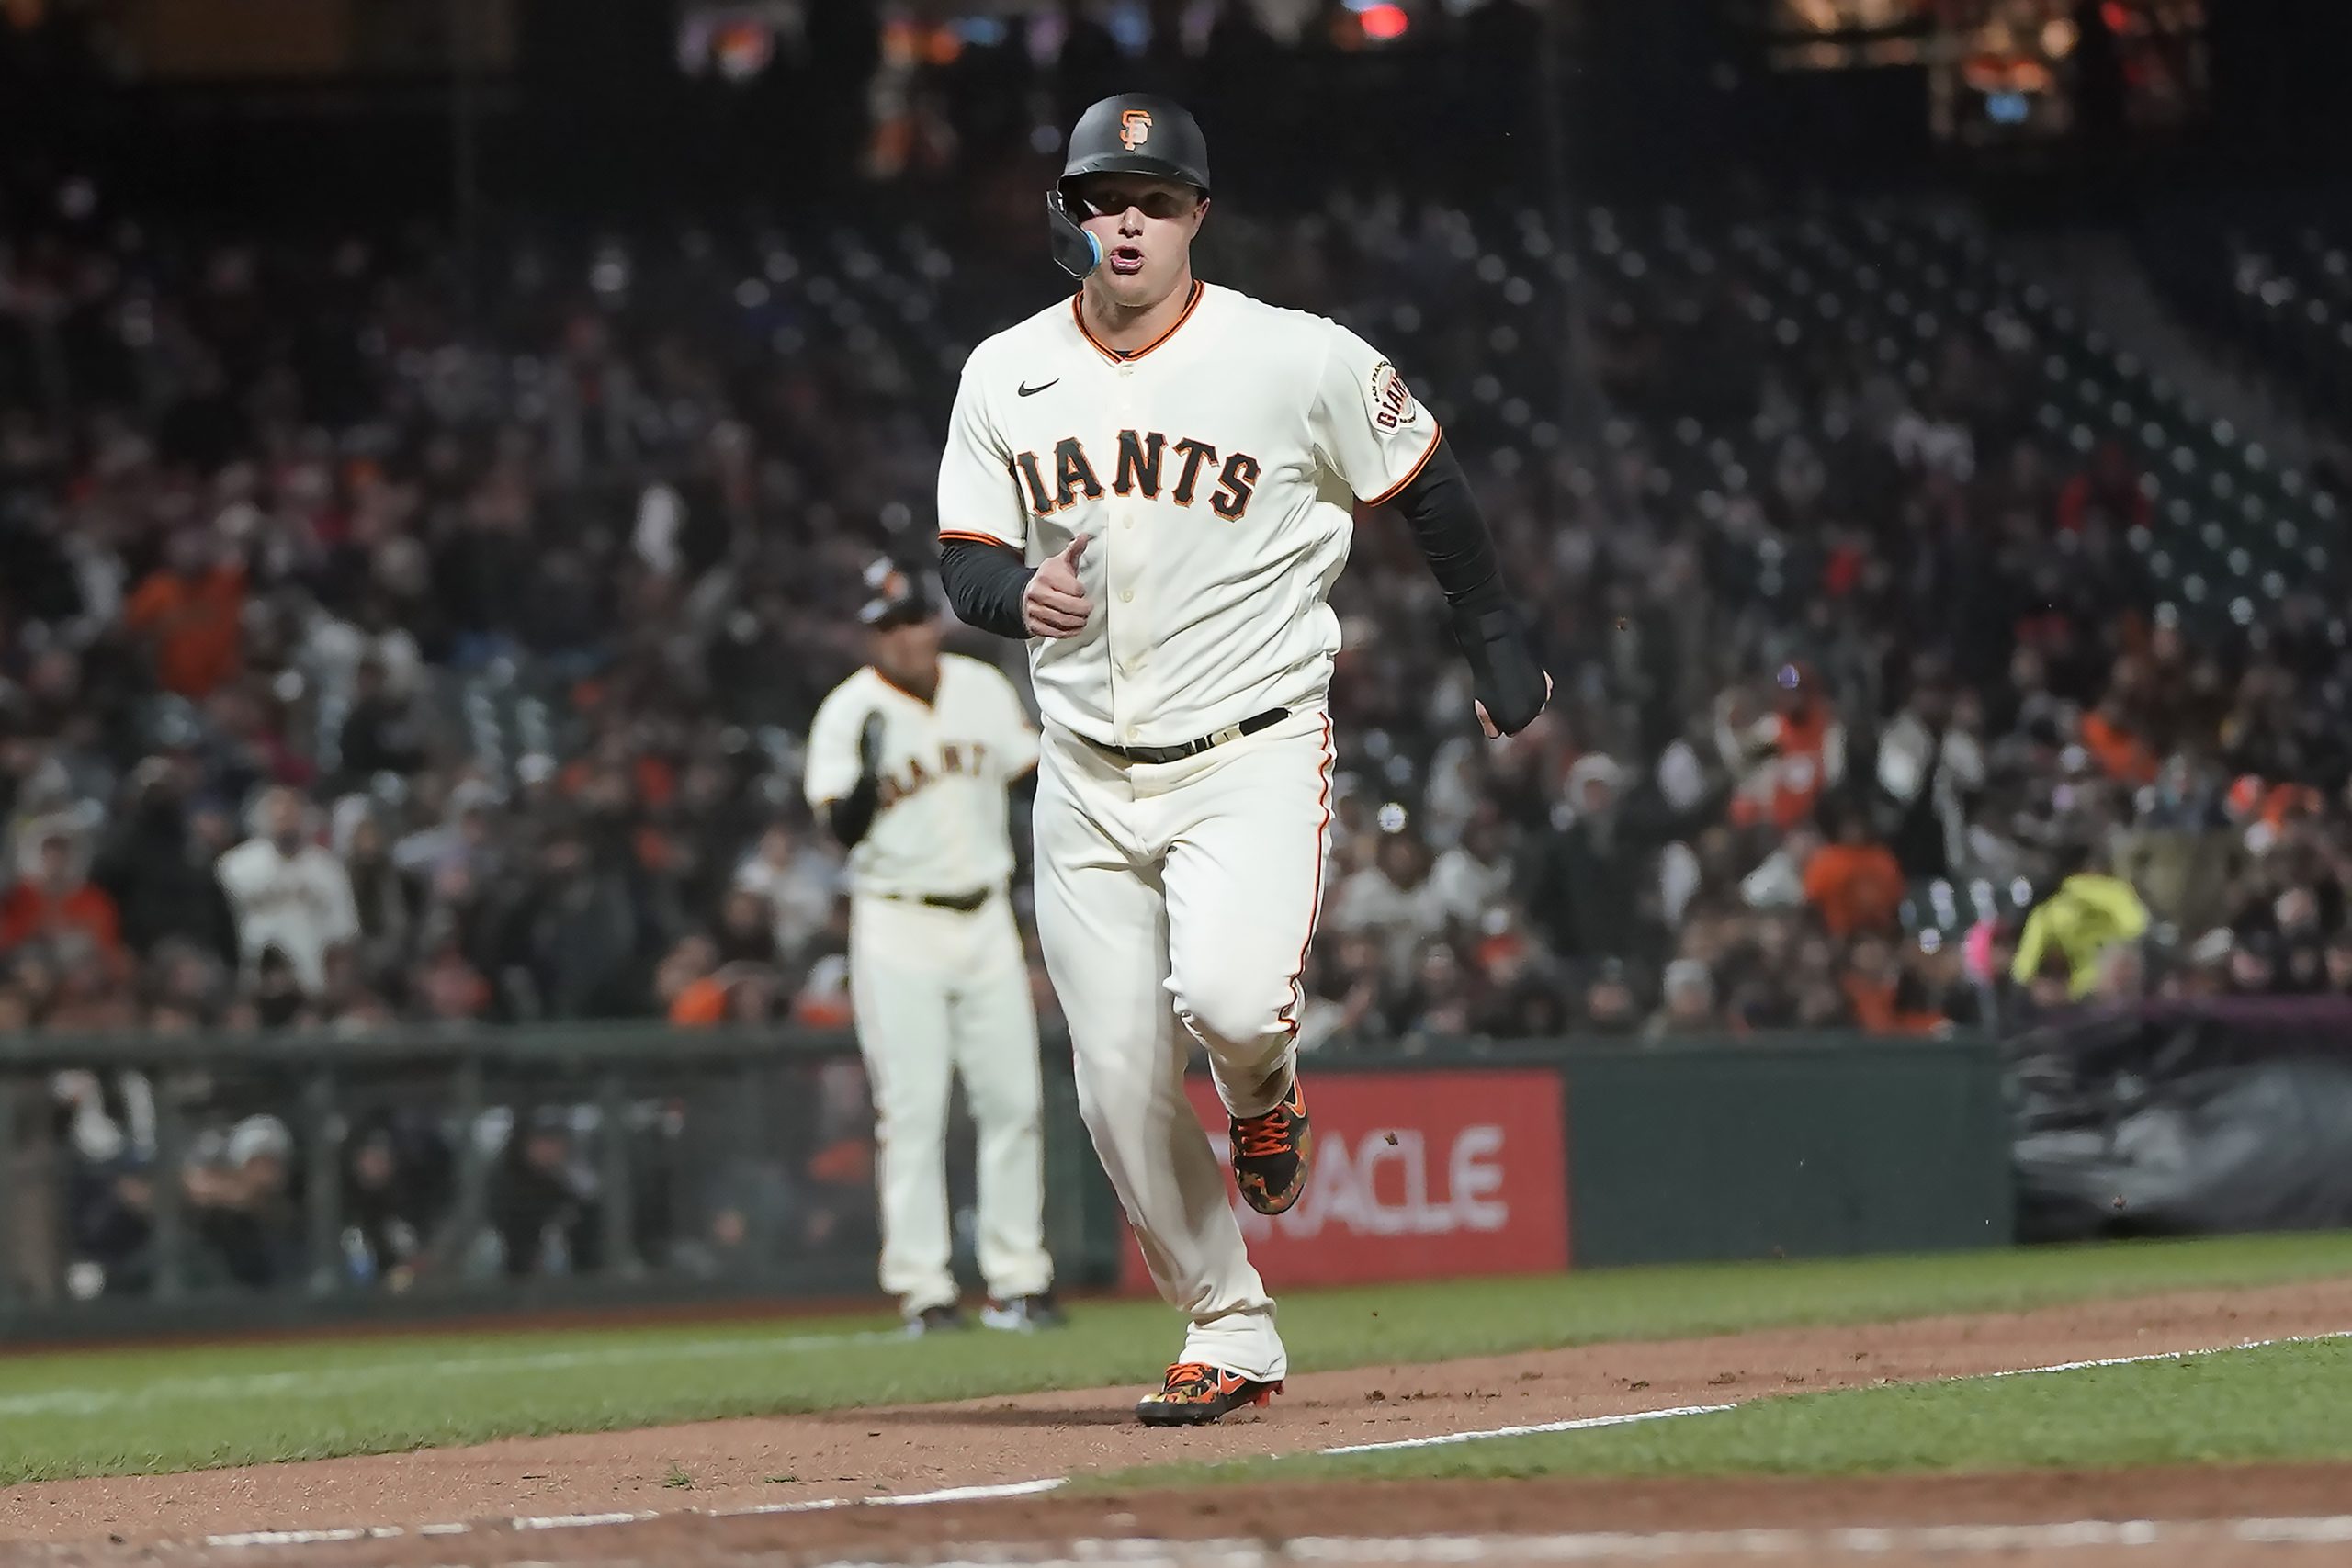 San Francisco Giants outfielder Joc Pederson owned a heckling Brewers fan after hitting a go ahead home run on Monday night